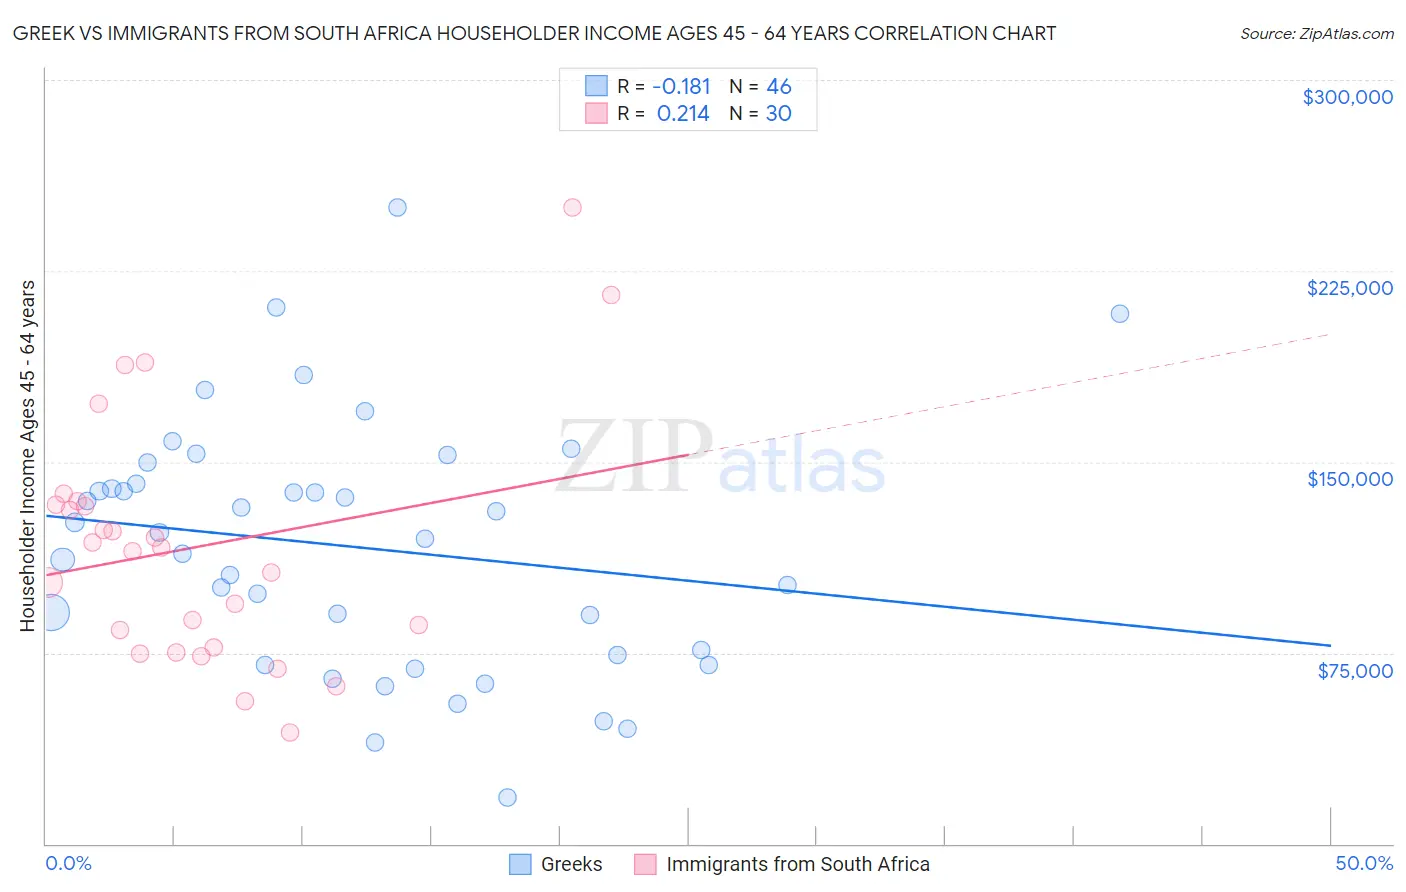 Greek vs Immigrants from South Africa Householder Income Ages 45 - 64 years